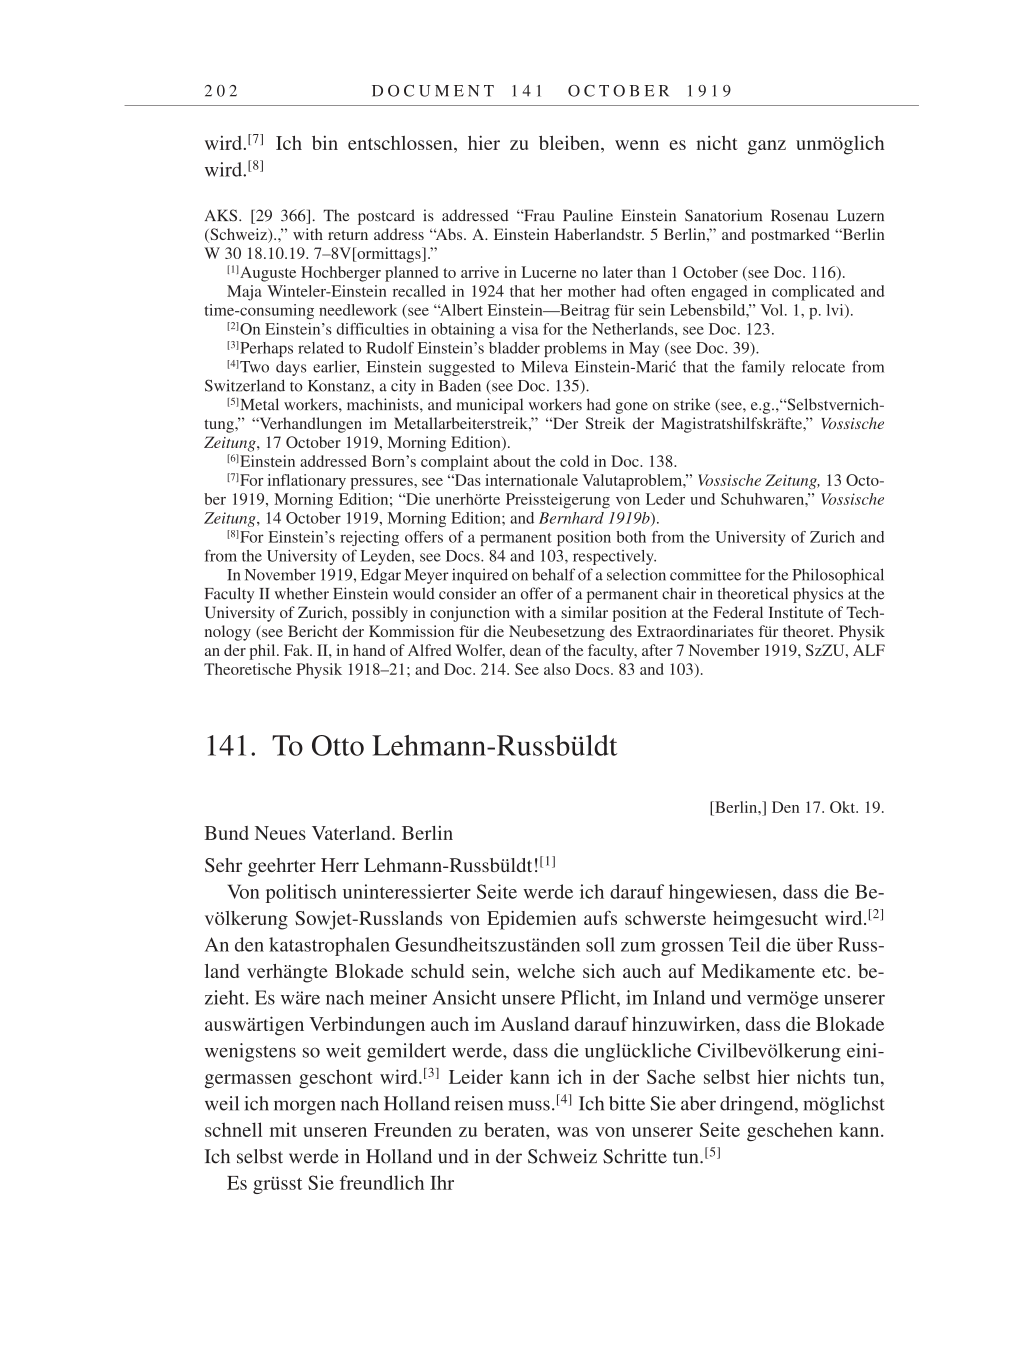 Volume 9: The Berlin Years: Correspondence January 1919-April 1920 page 202